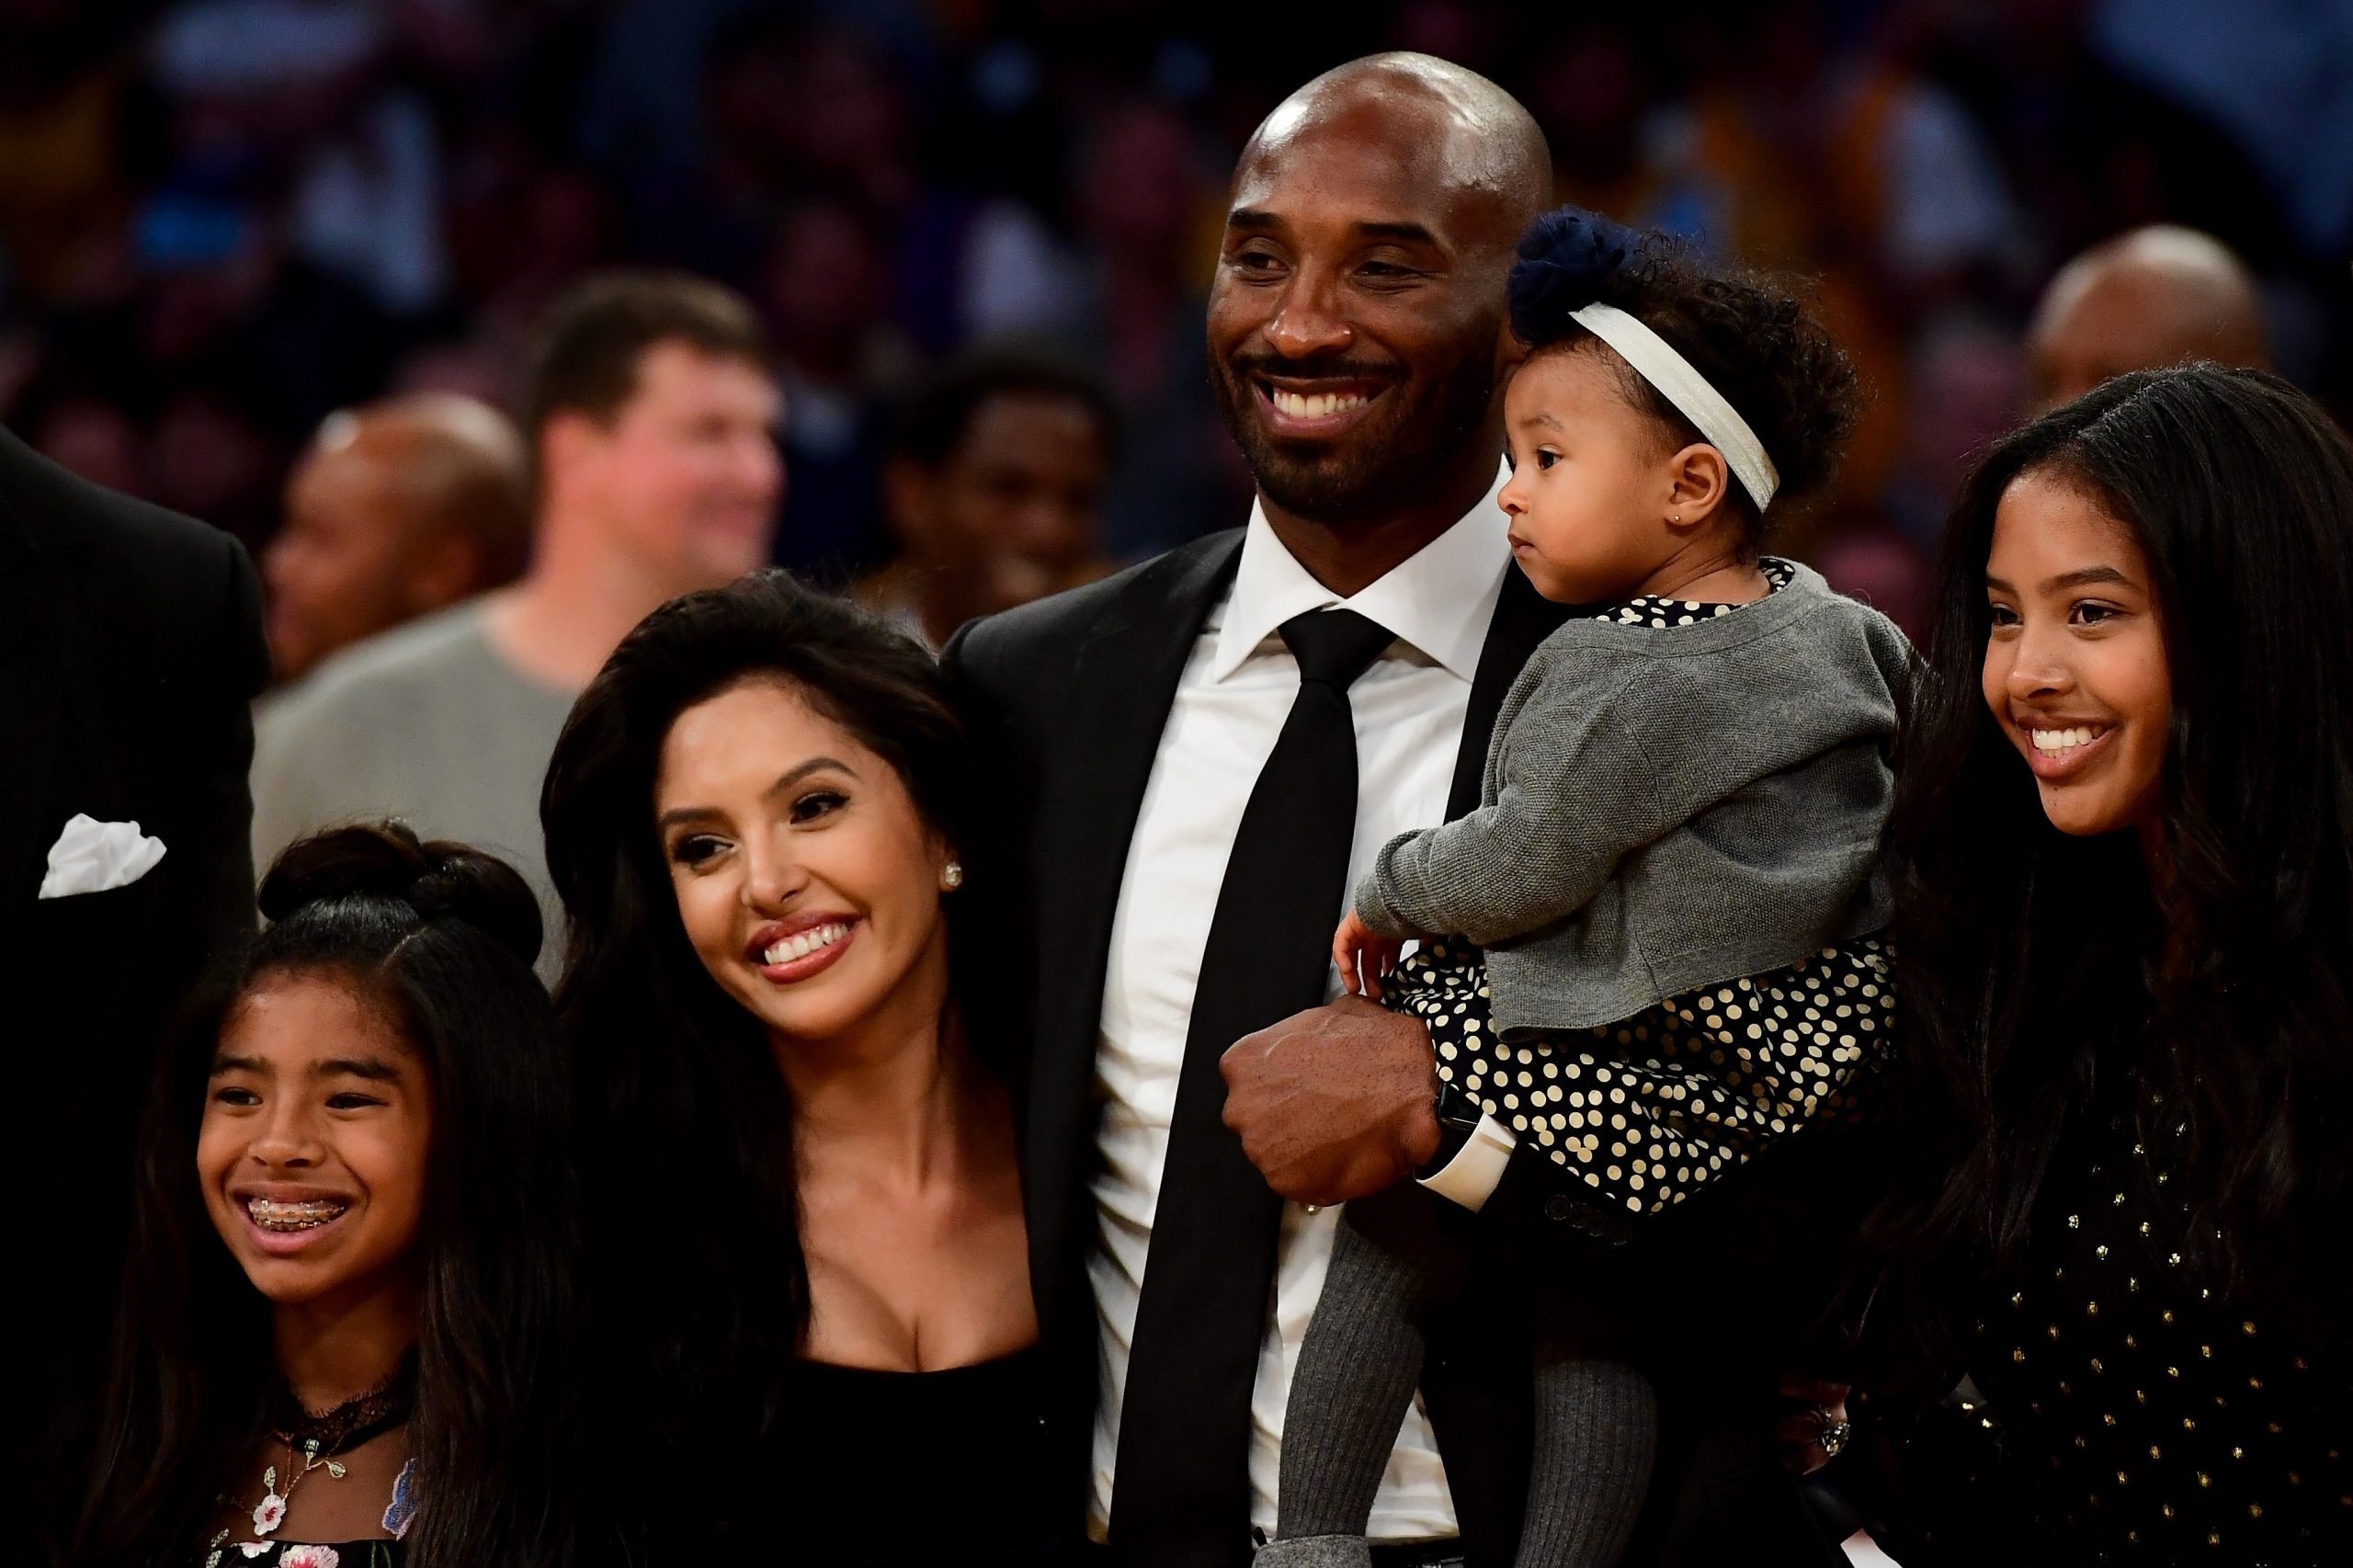 Vanessa Bryant Reveals How She’s Coping With Kobe Bryant and Gigi’s Deaths